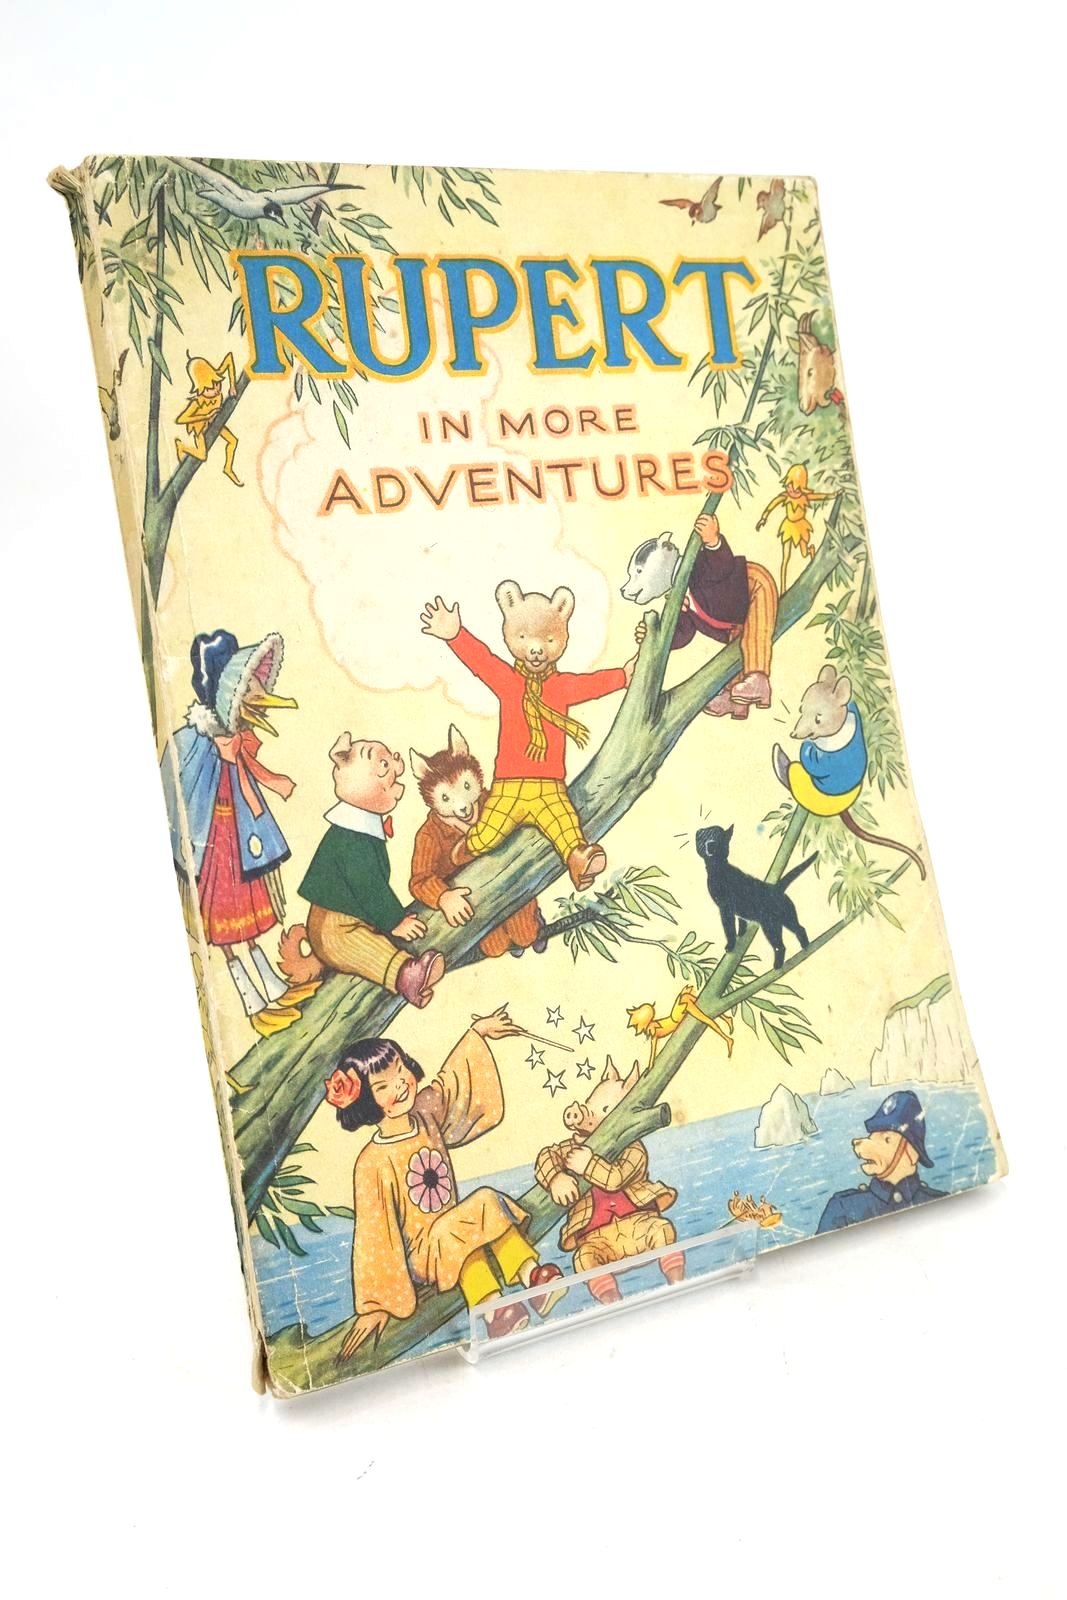 Photo of RUPERT ANNUAL 1944 - RUPERT IN MORE ADVENTURES written by Bestall, Alfred illustrated by Bestall, Alfred published by Daily Express (STOCK CODE: 1326738)  for sale by Stella & Rose's Books